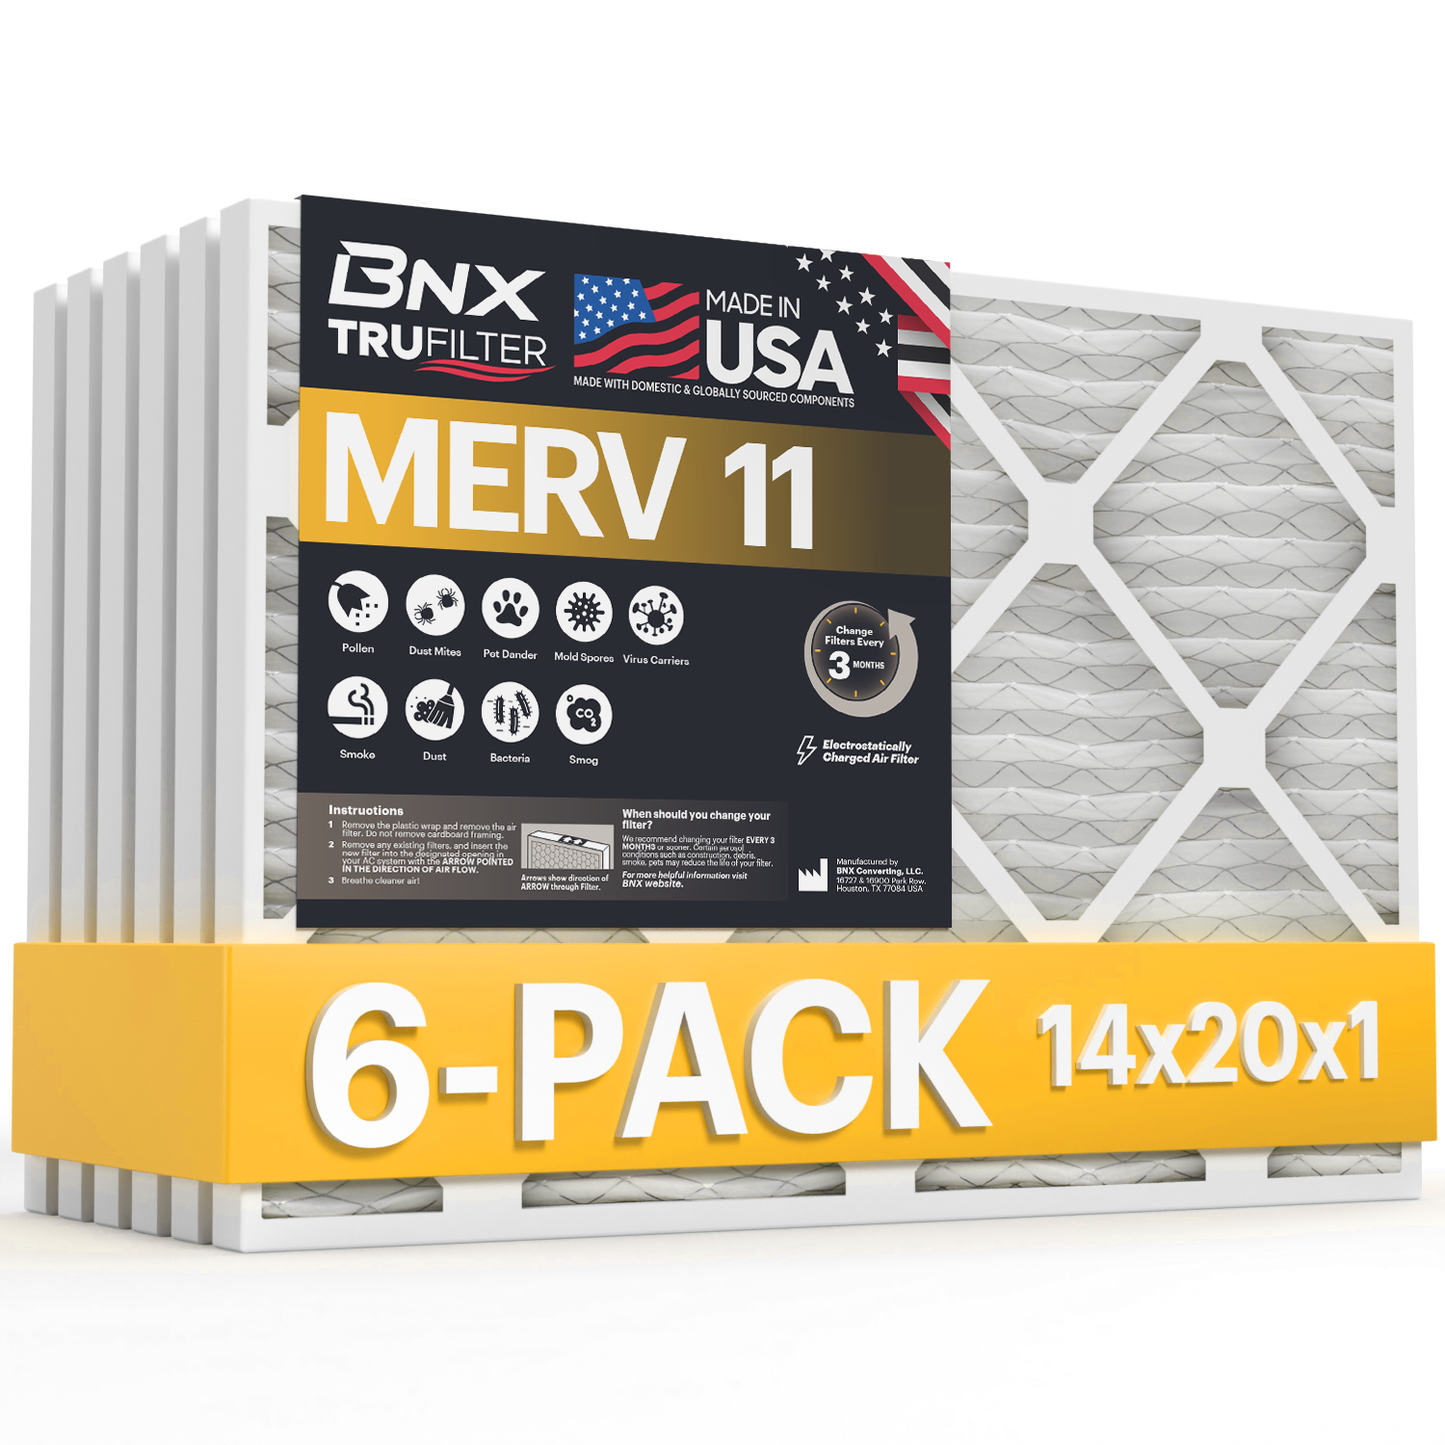 BNX TruFilter 14x20x1 MERV 11 Air Filter 6 Pack - MADE IN USA - Electrostatic Pleated Air Conditioner HVAC AC Furnace Filters - Removes Dust, Mold, Pollen, Lint, Pet Dander, Smoke, Smog